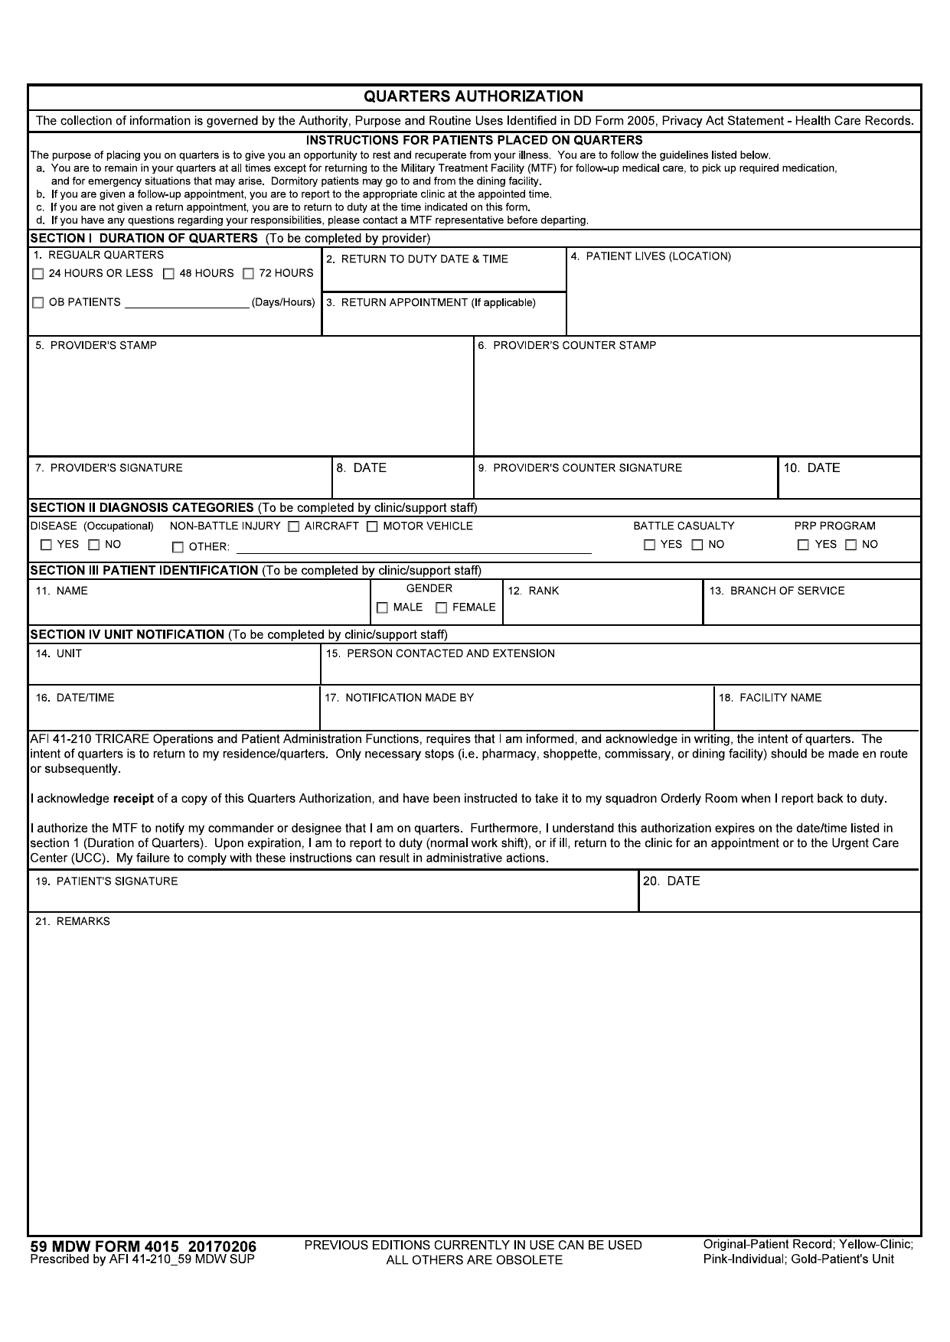 59 MDW Form 4015 Quarters Authorization, Page 1